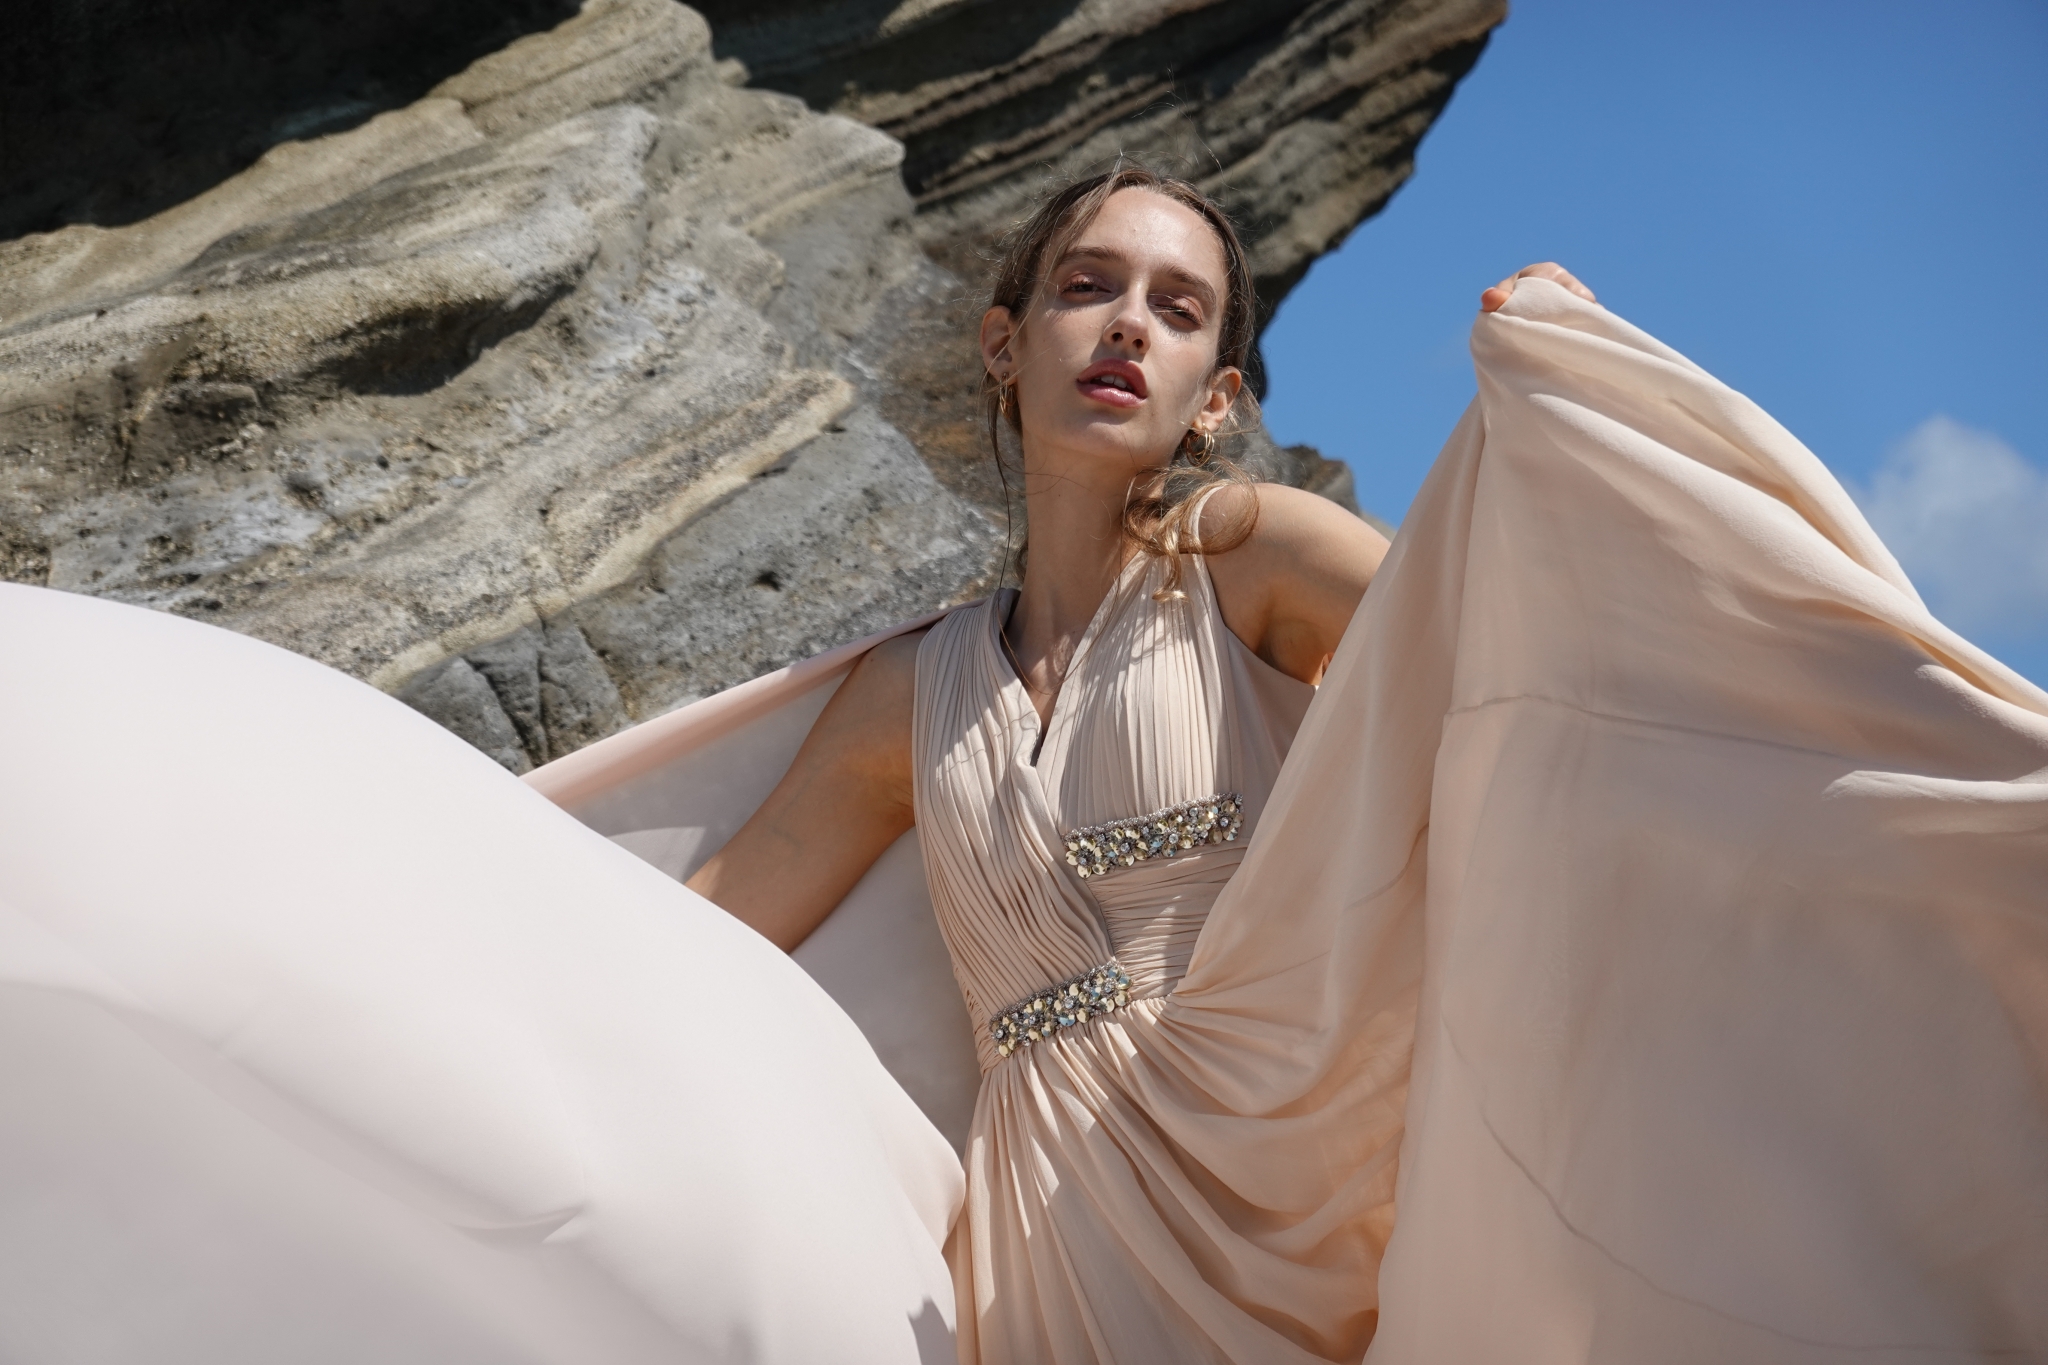 Female model sat in long silk dress with rocky outcrop in background